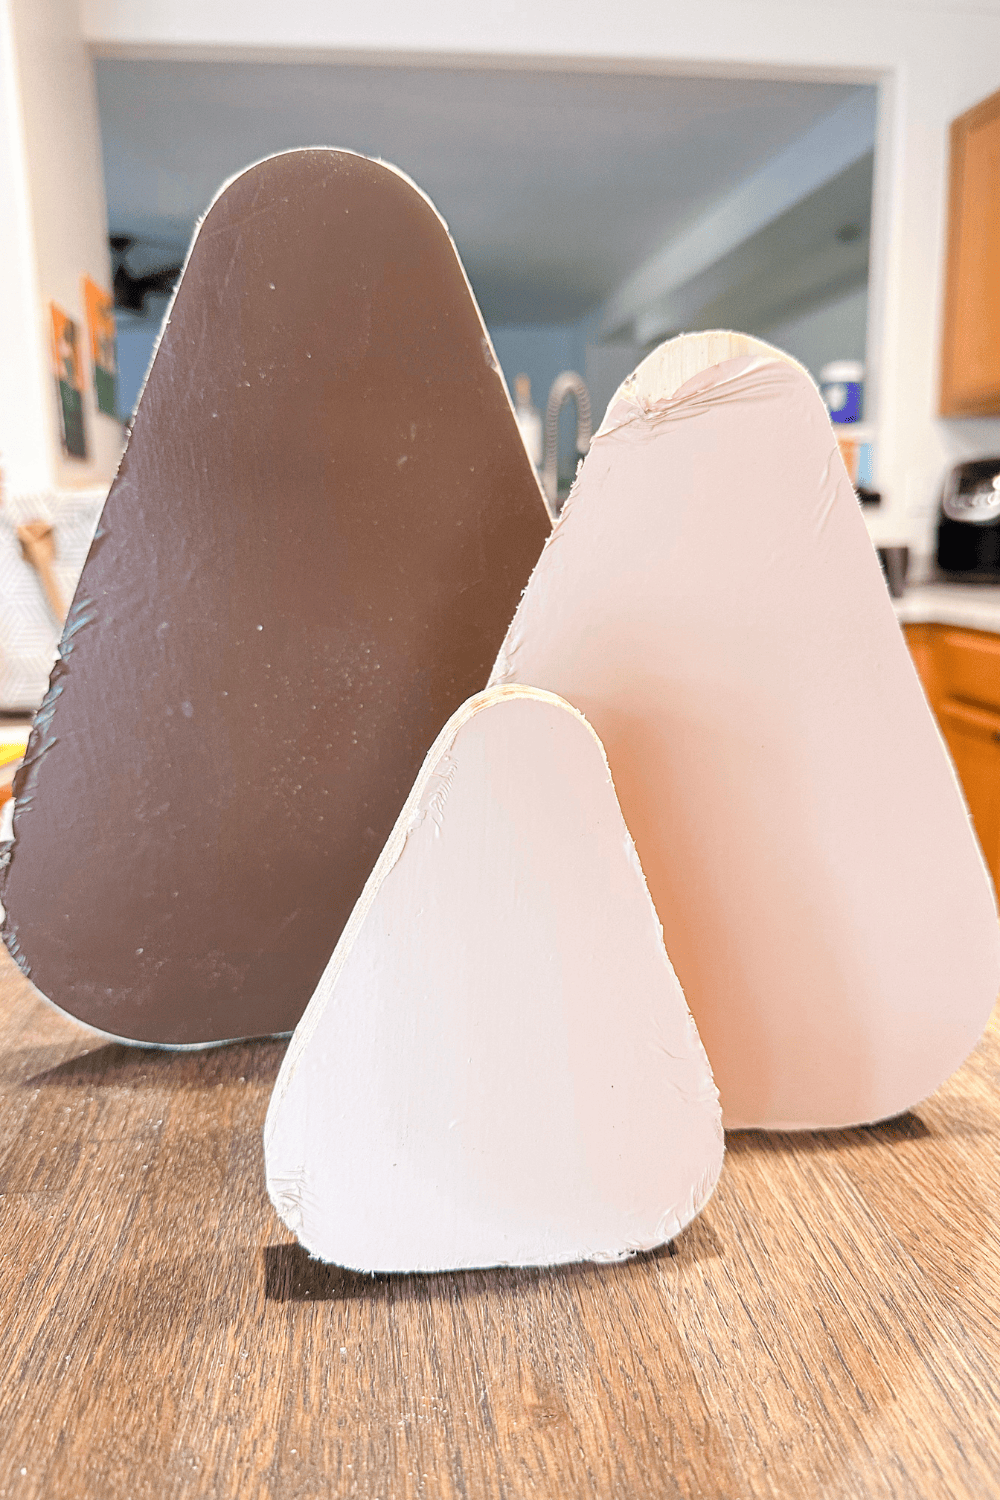 3 different sized candy corn shapes. The largest one in the back with brown vinyl. The smaller 2 in the front with pink vinyl.